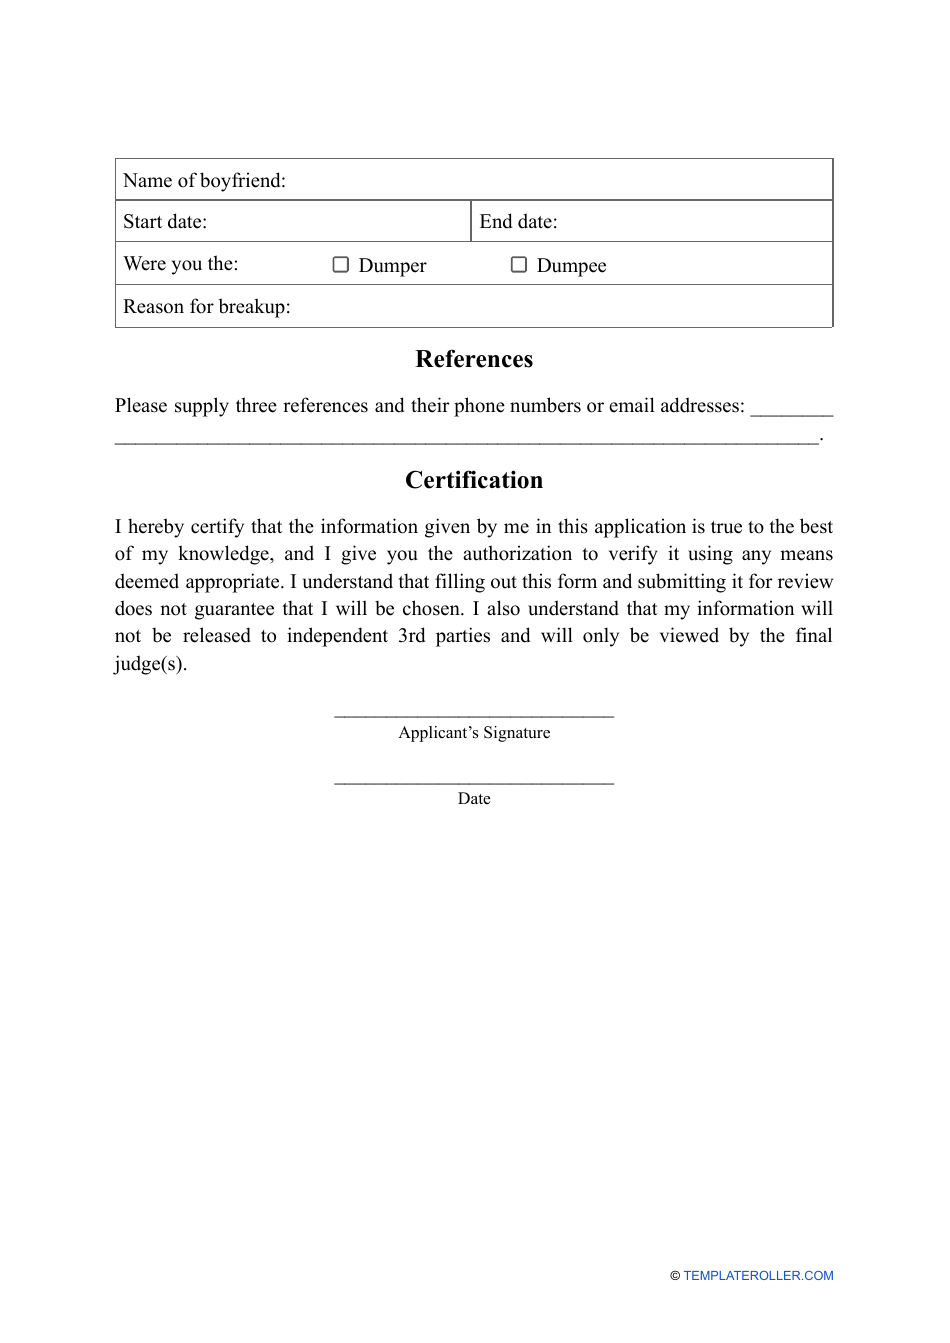 Girlfriend Application Form Fill Out Sign Online And Download Pdf Templateroller 2776